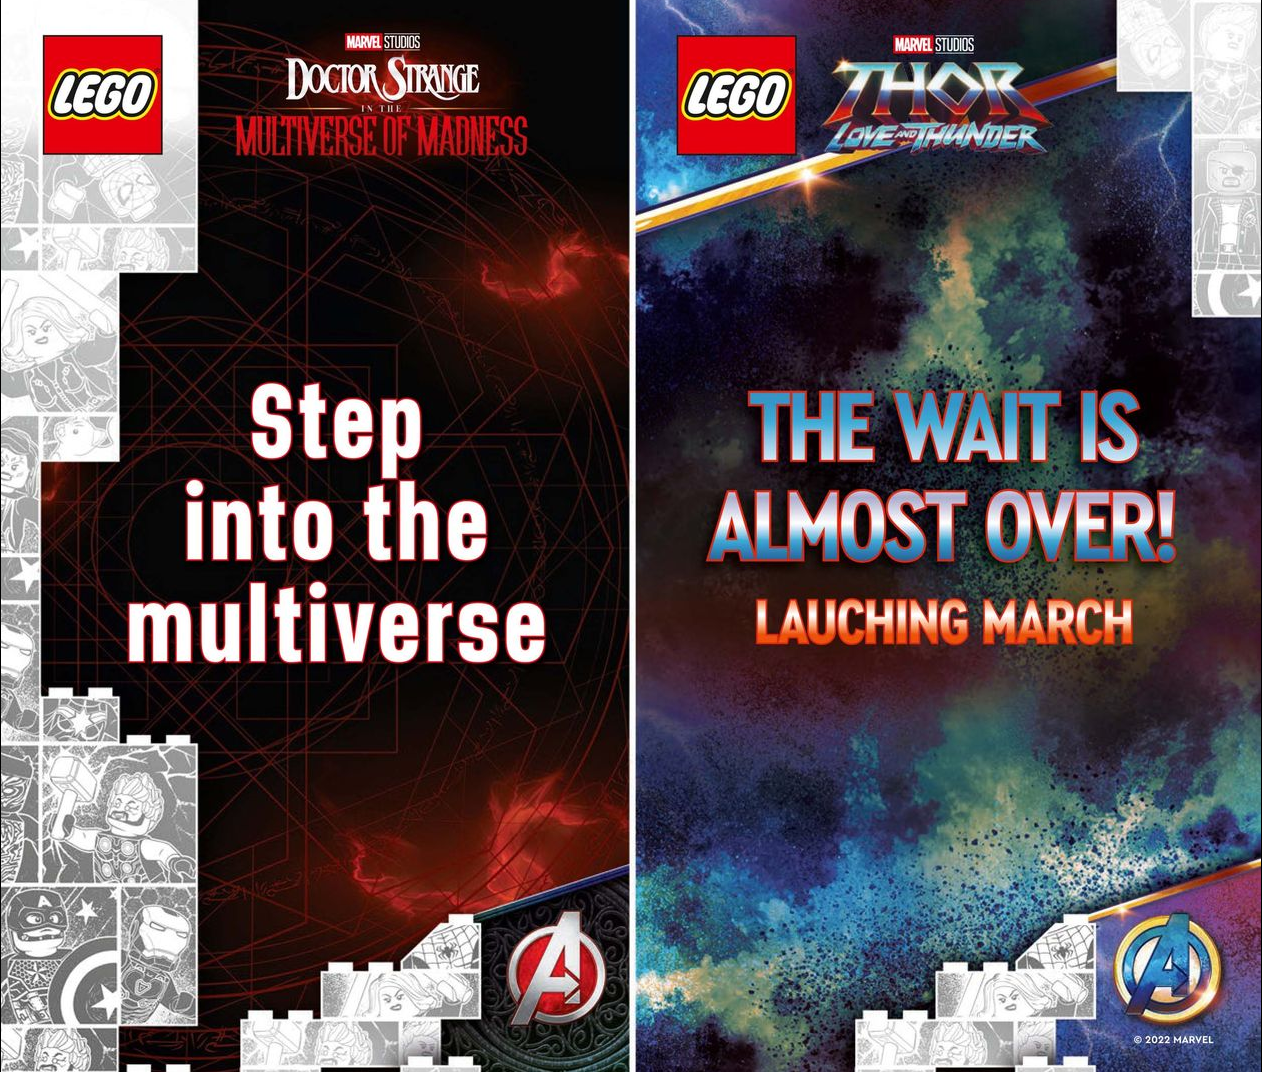 Lego Calendar March 2022 Lego Thor Love And Thunder Sets Coming March 2022! - Jay's Brick Blog